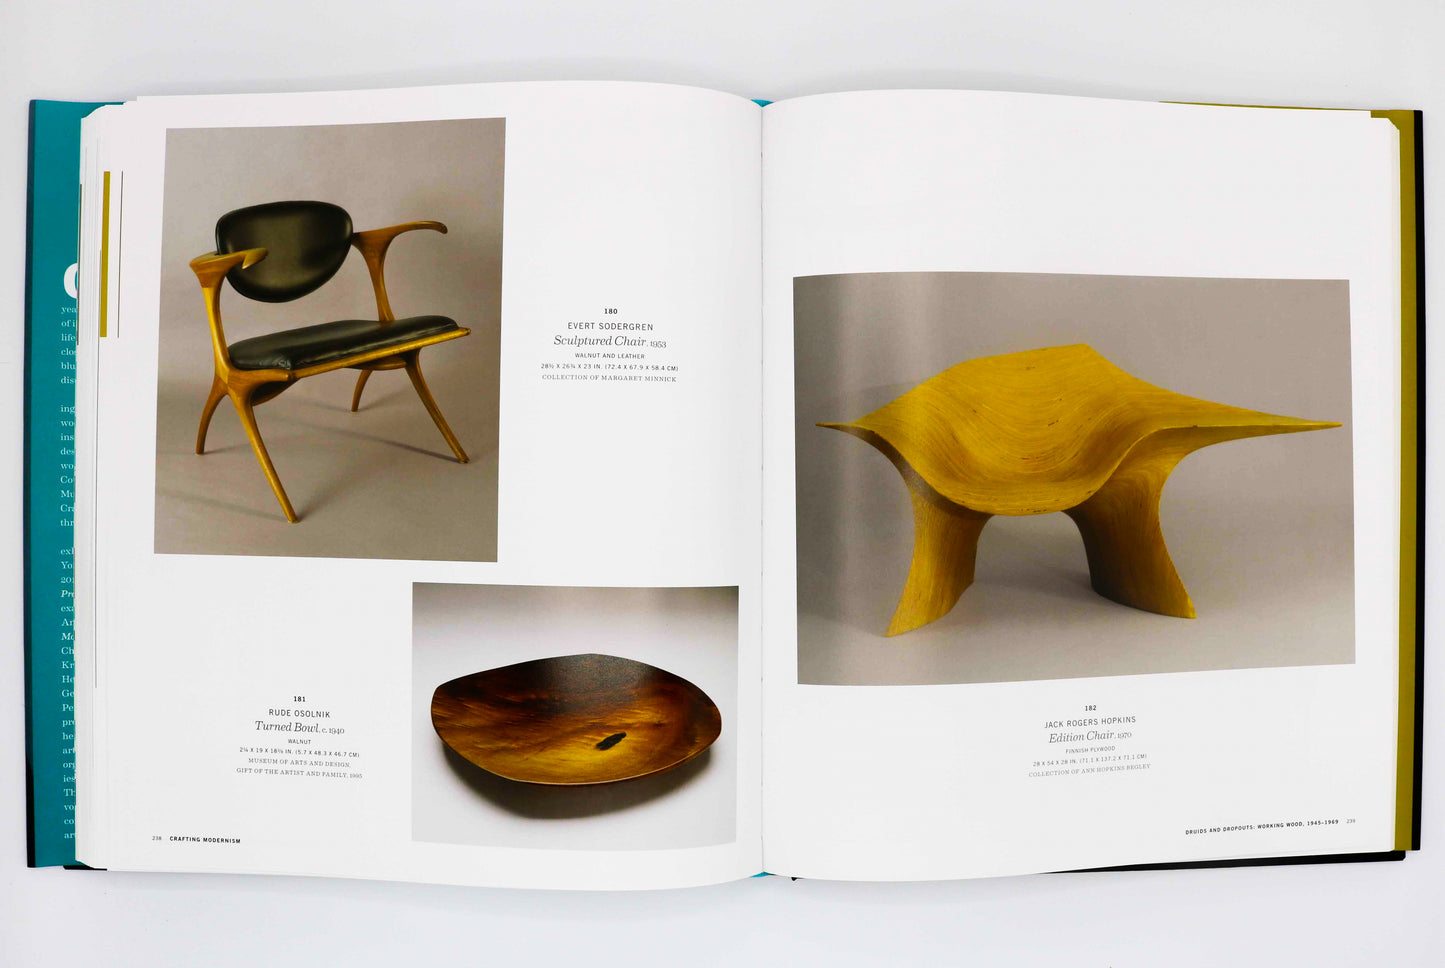 Crafting Modernism: Midcentury American Art and Design